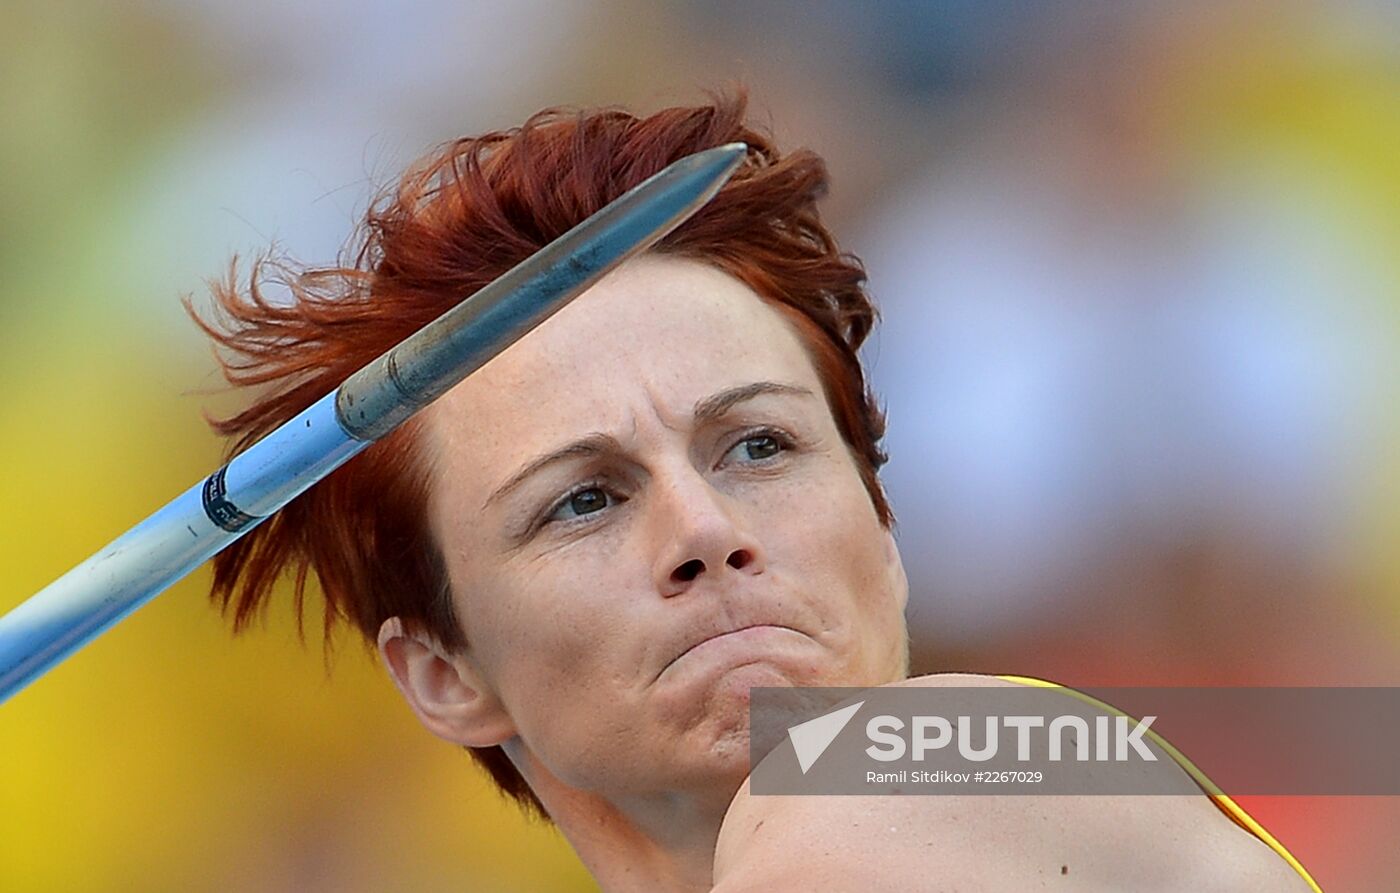 2013 IAAF World Championships. Day 9. Evening session